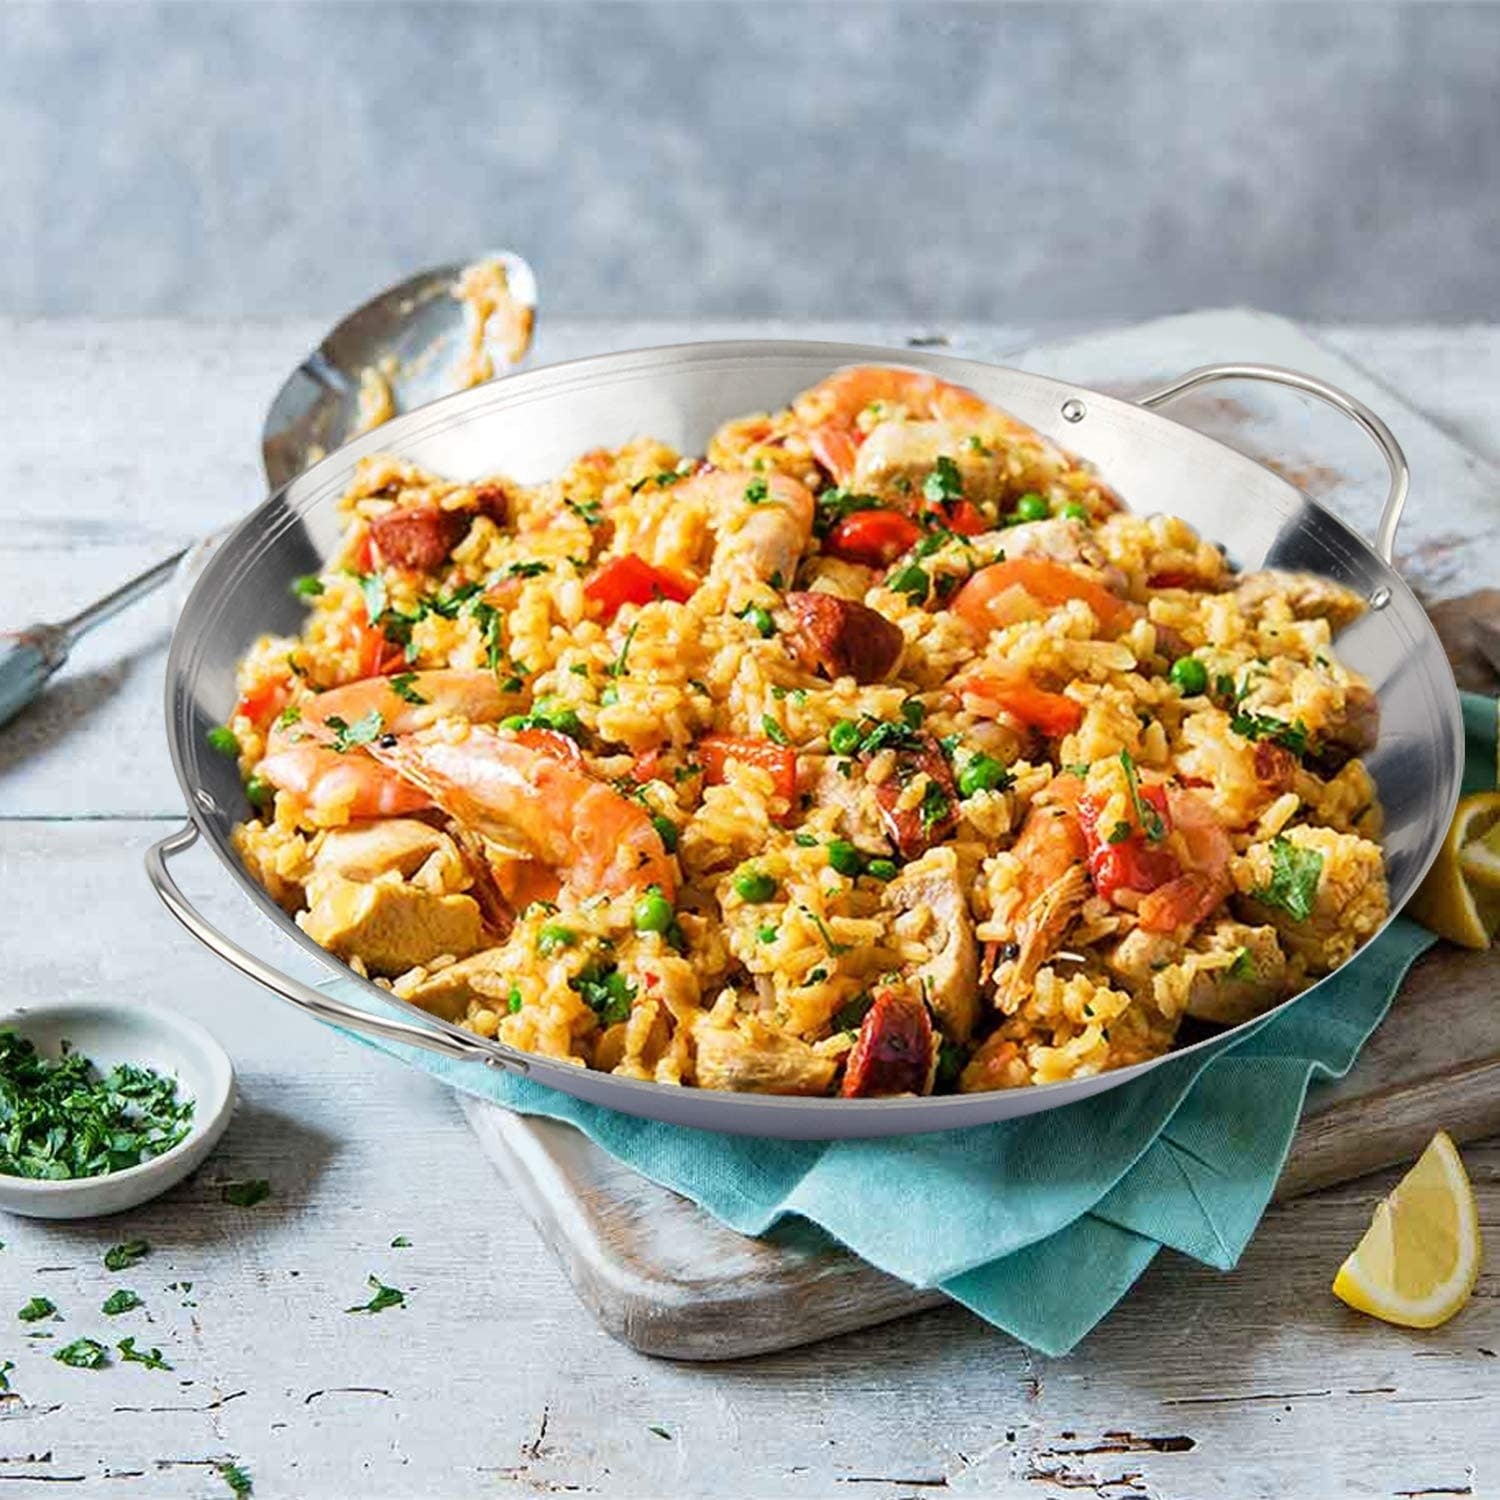 Paul's Cooking Tips: How to use a paella pan for biscuits, stir fry,  roasting chicken and more